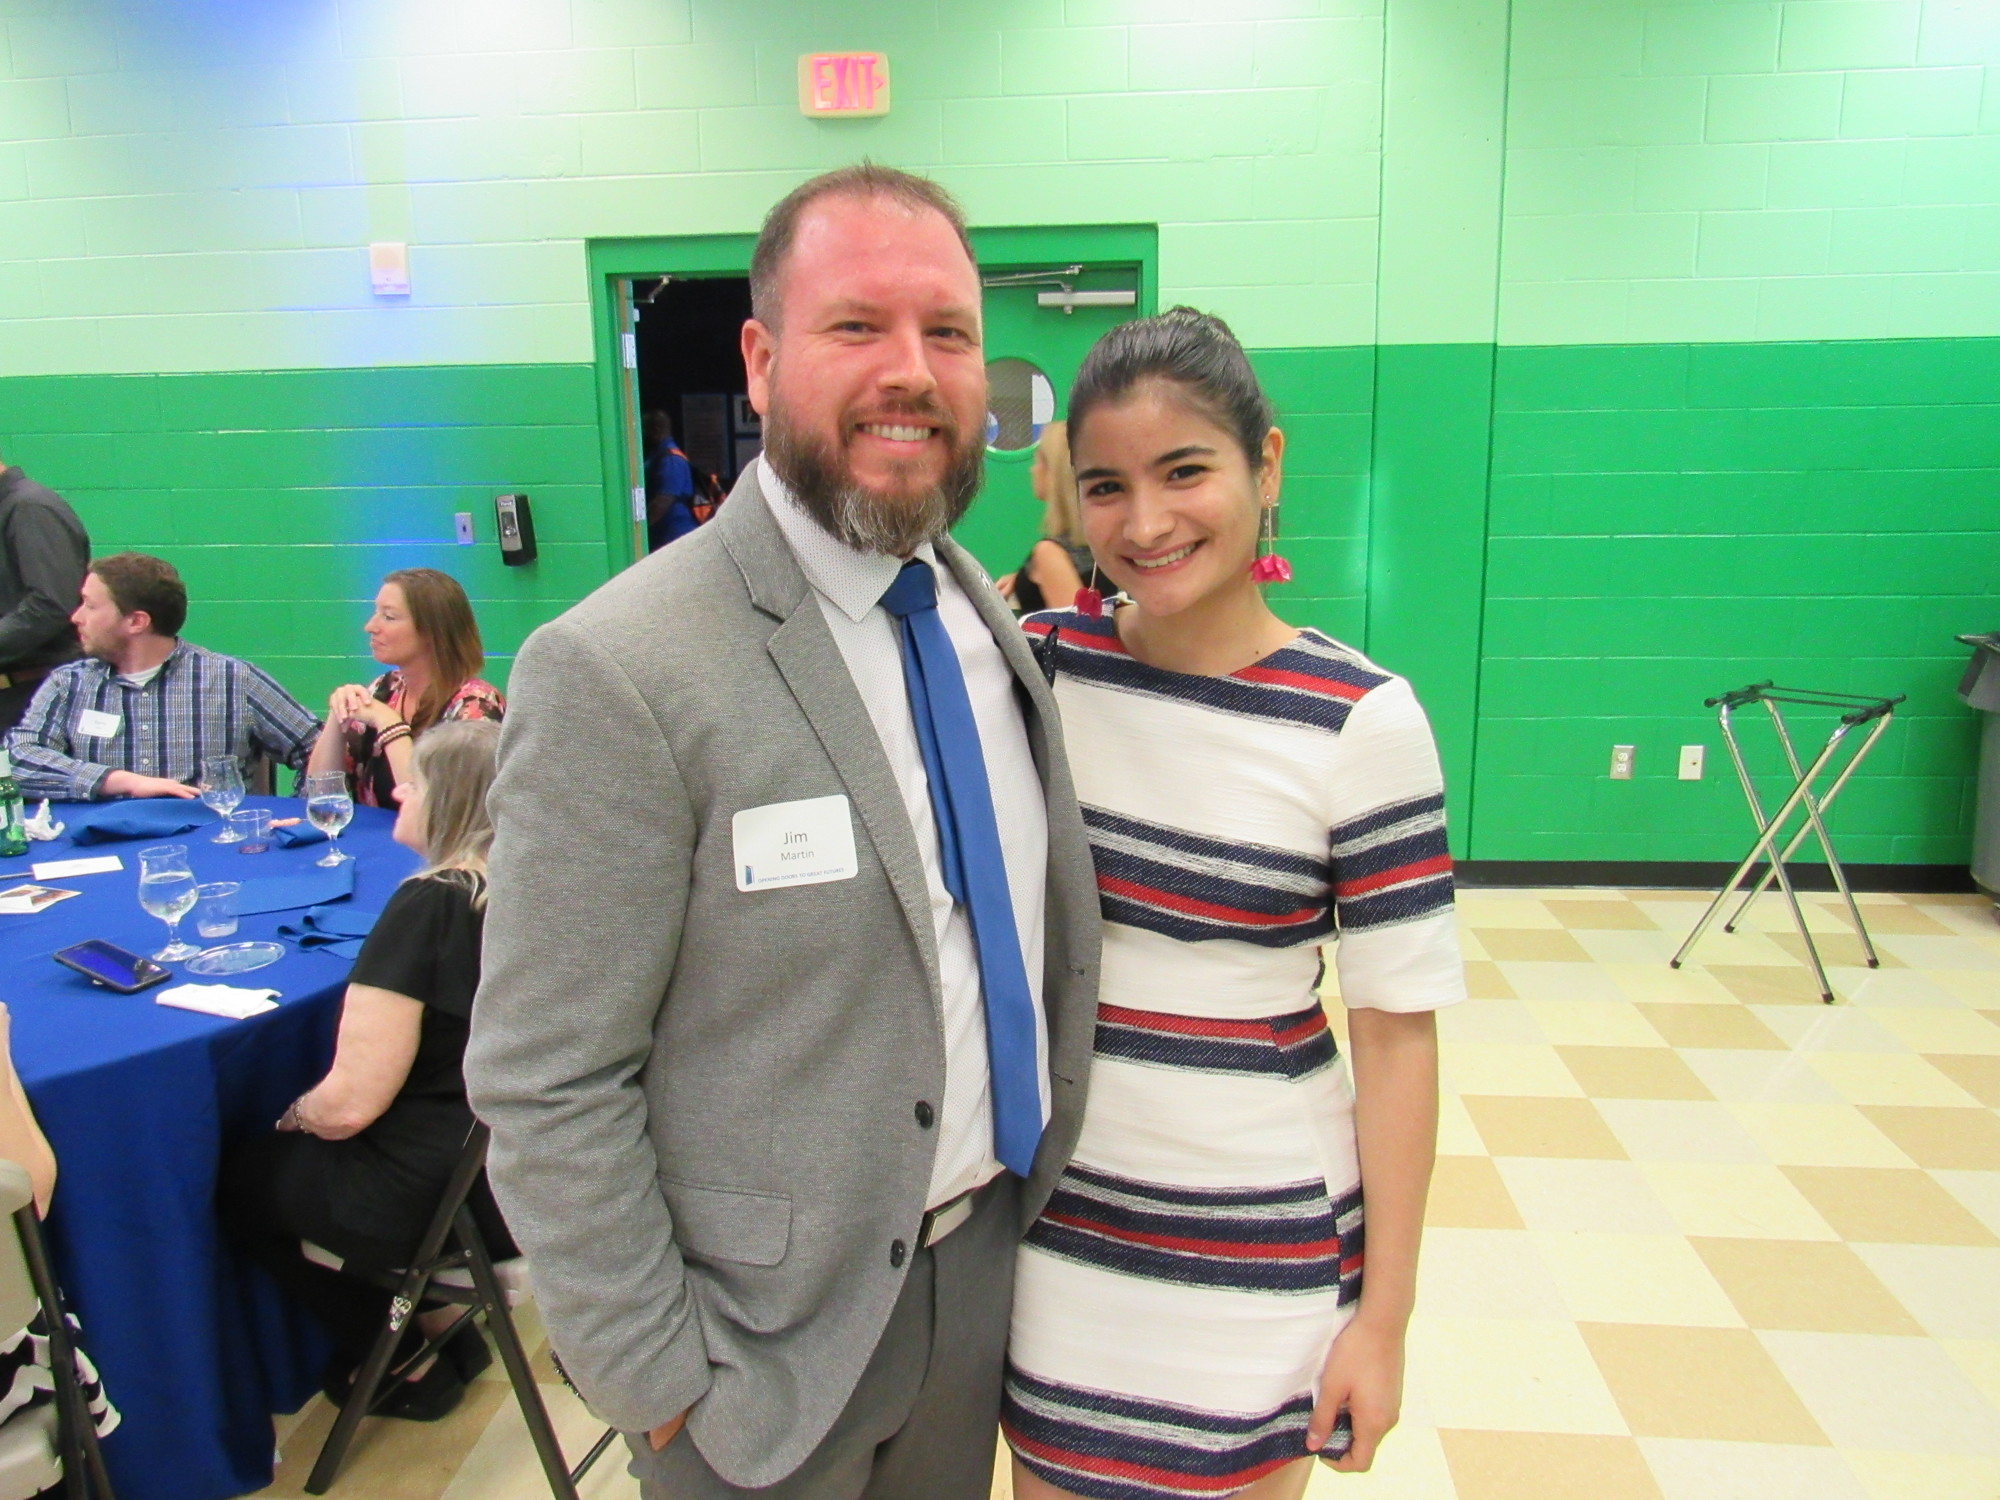 Jim Martin with Leonela Tase Sueiro, who is Boys & Girls Clubs of Sarasota County’s 2019 Youth of the Year.